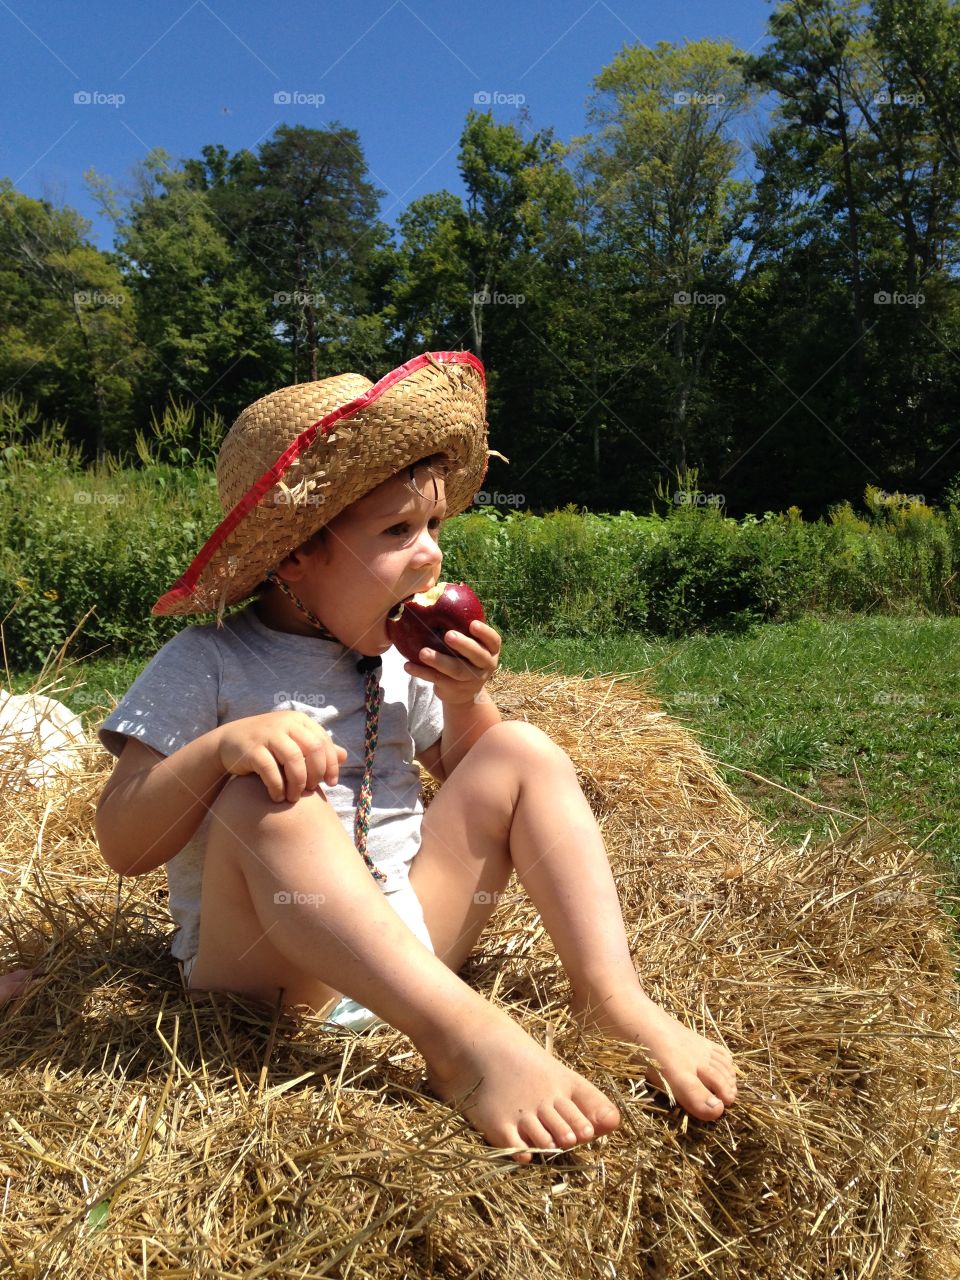 View of young boy sitting on hay eating apple